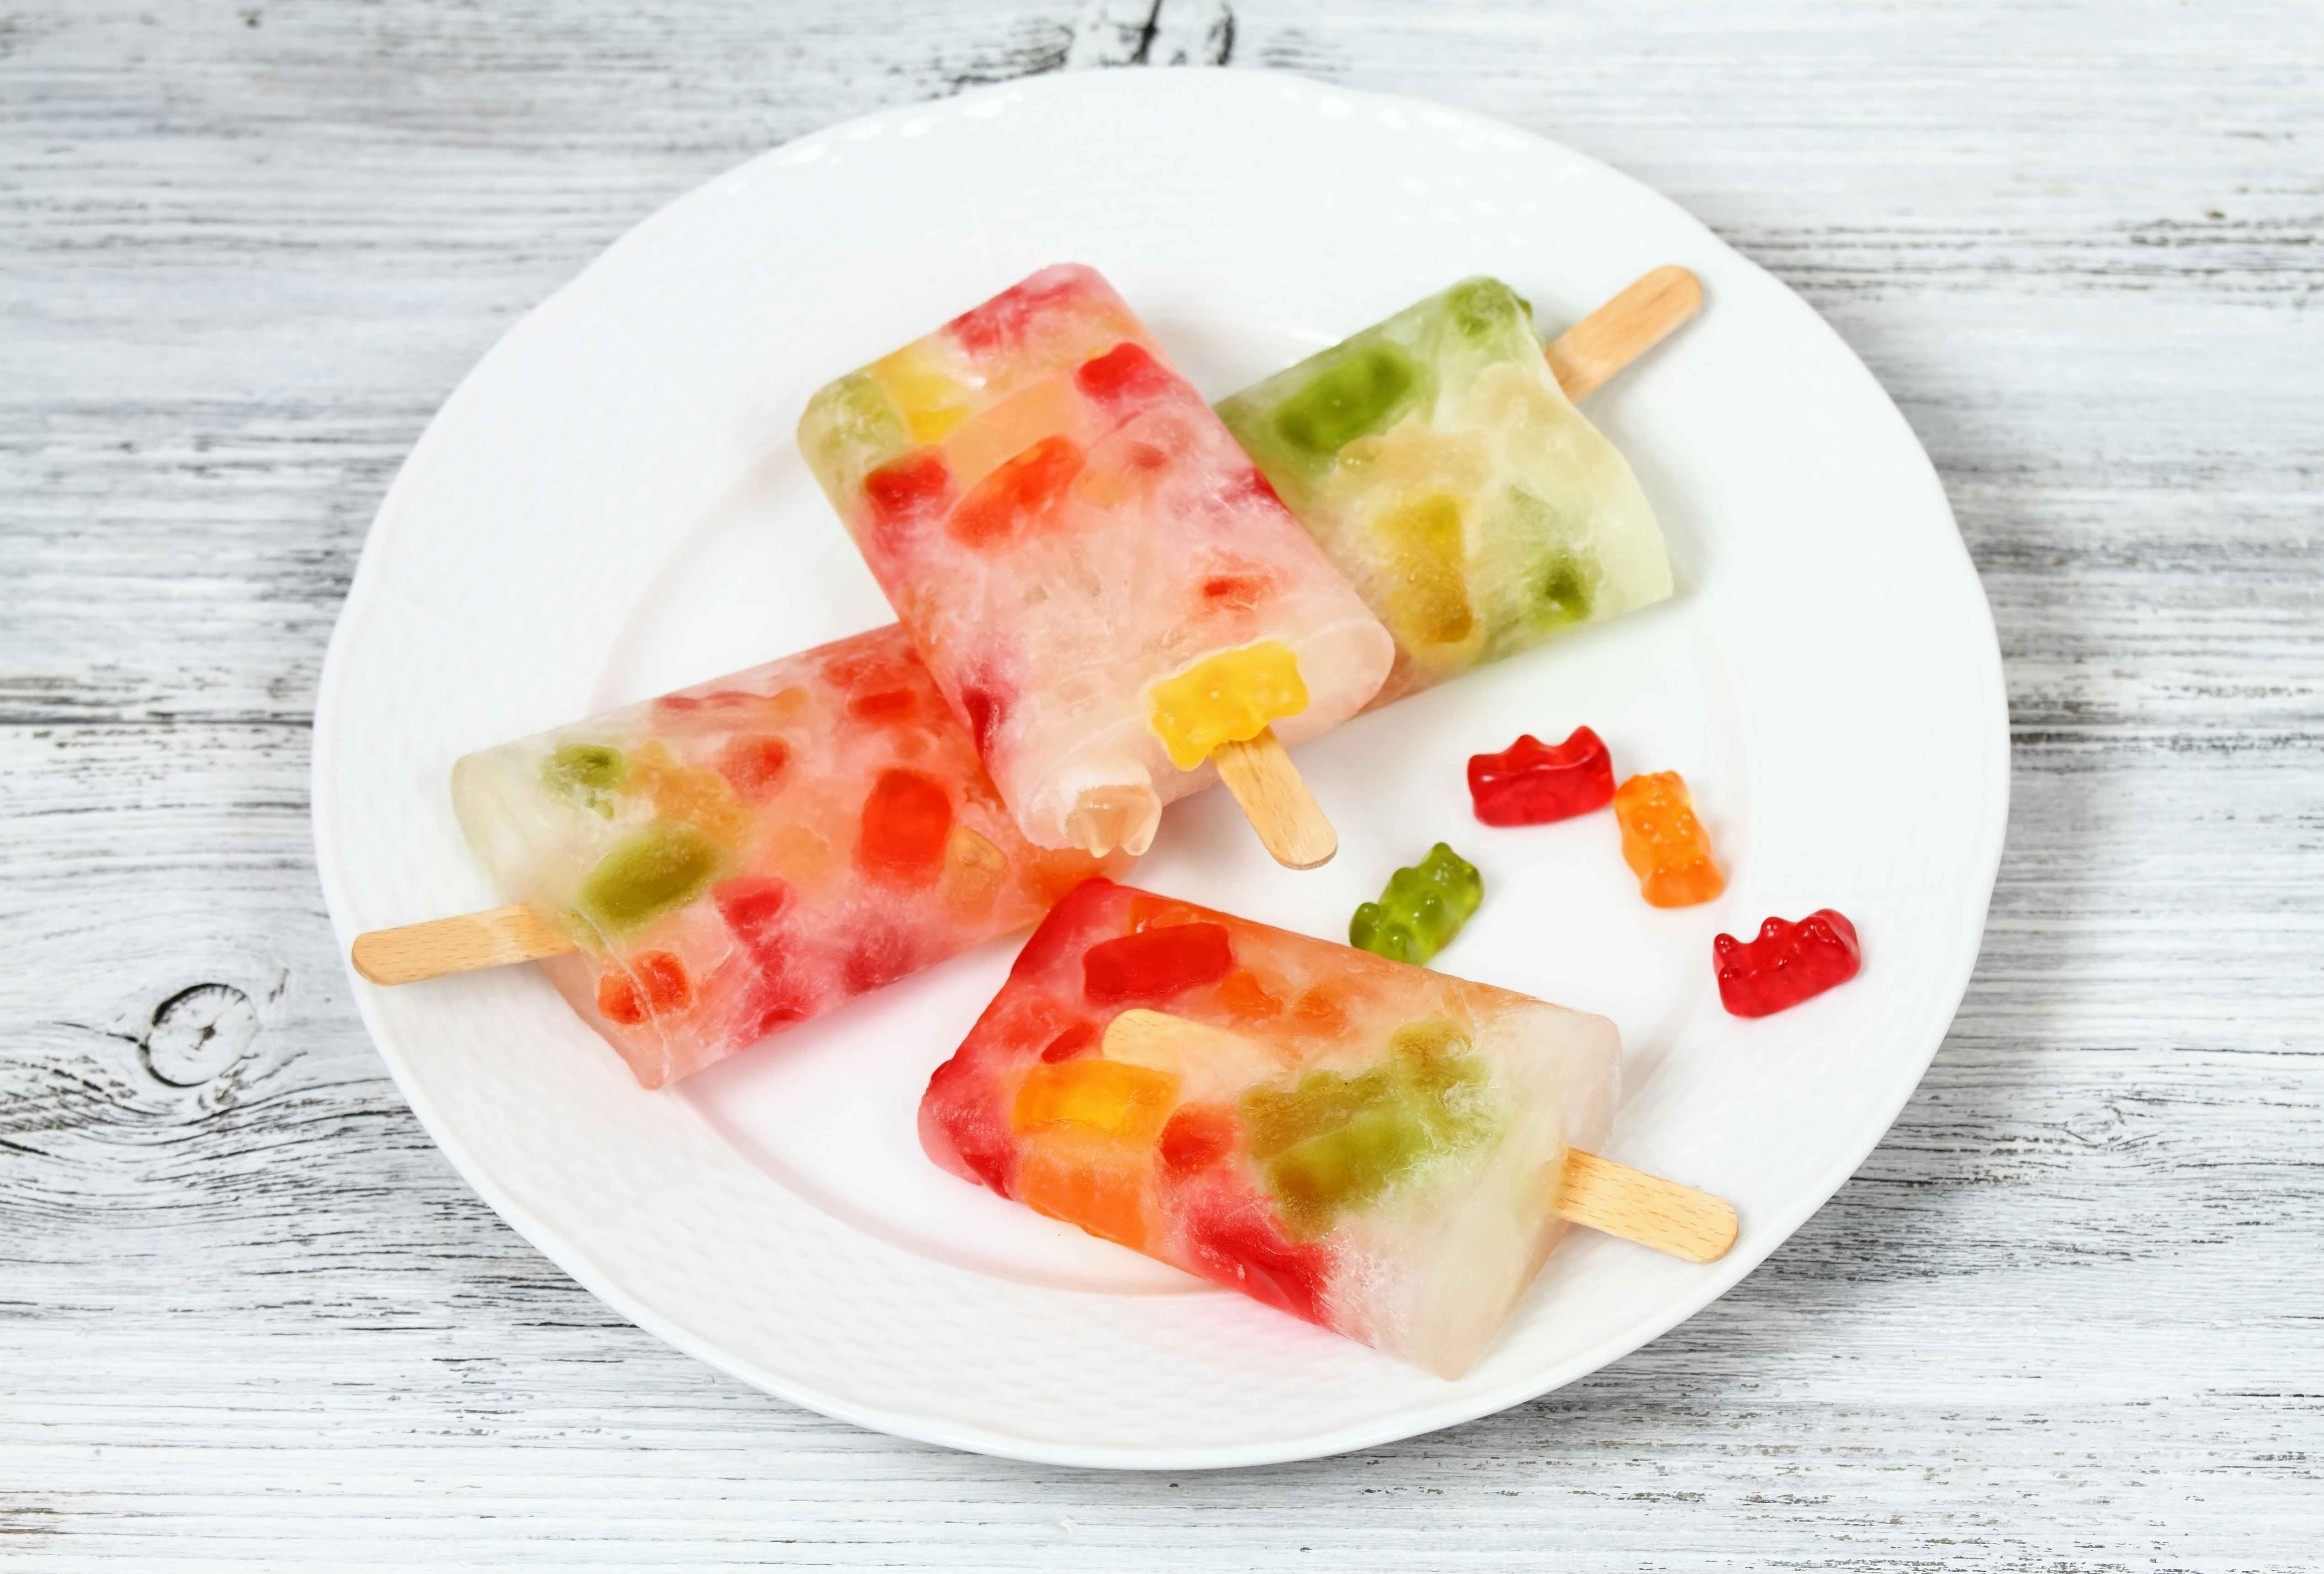 Popsicles made with gummi bears sitting on a plate